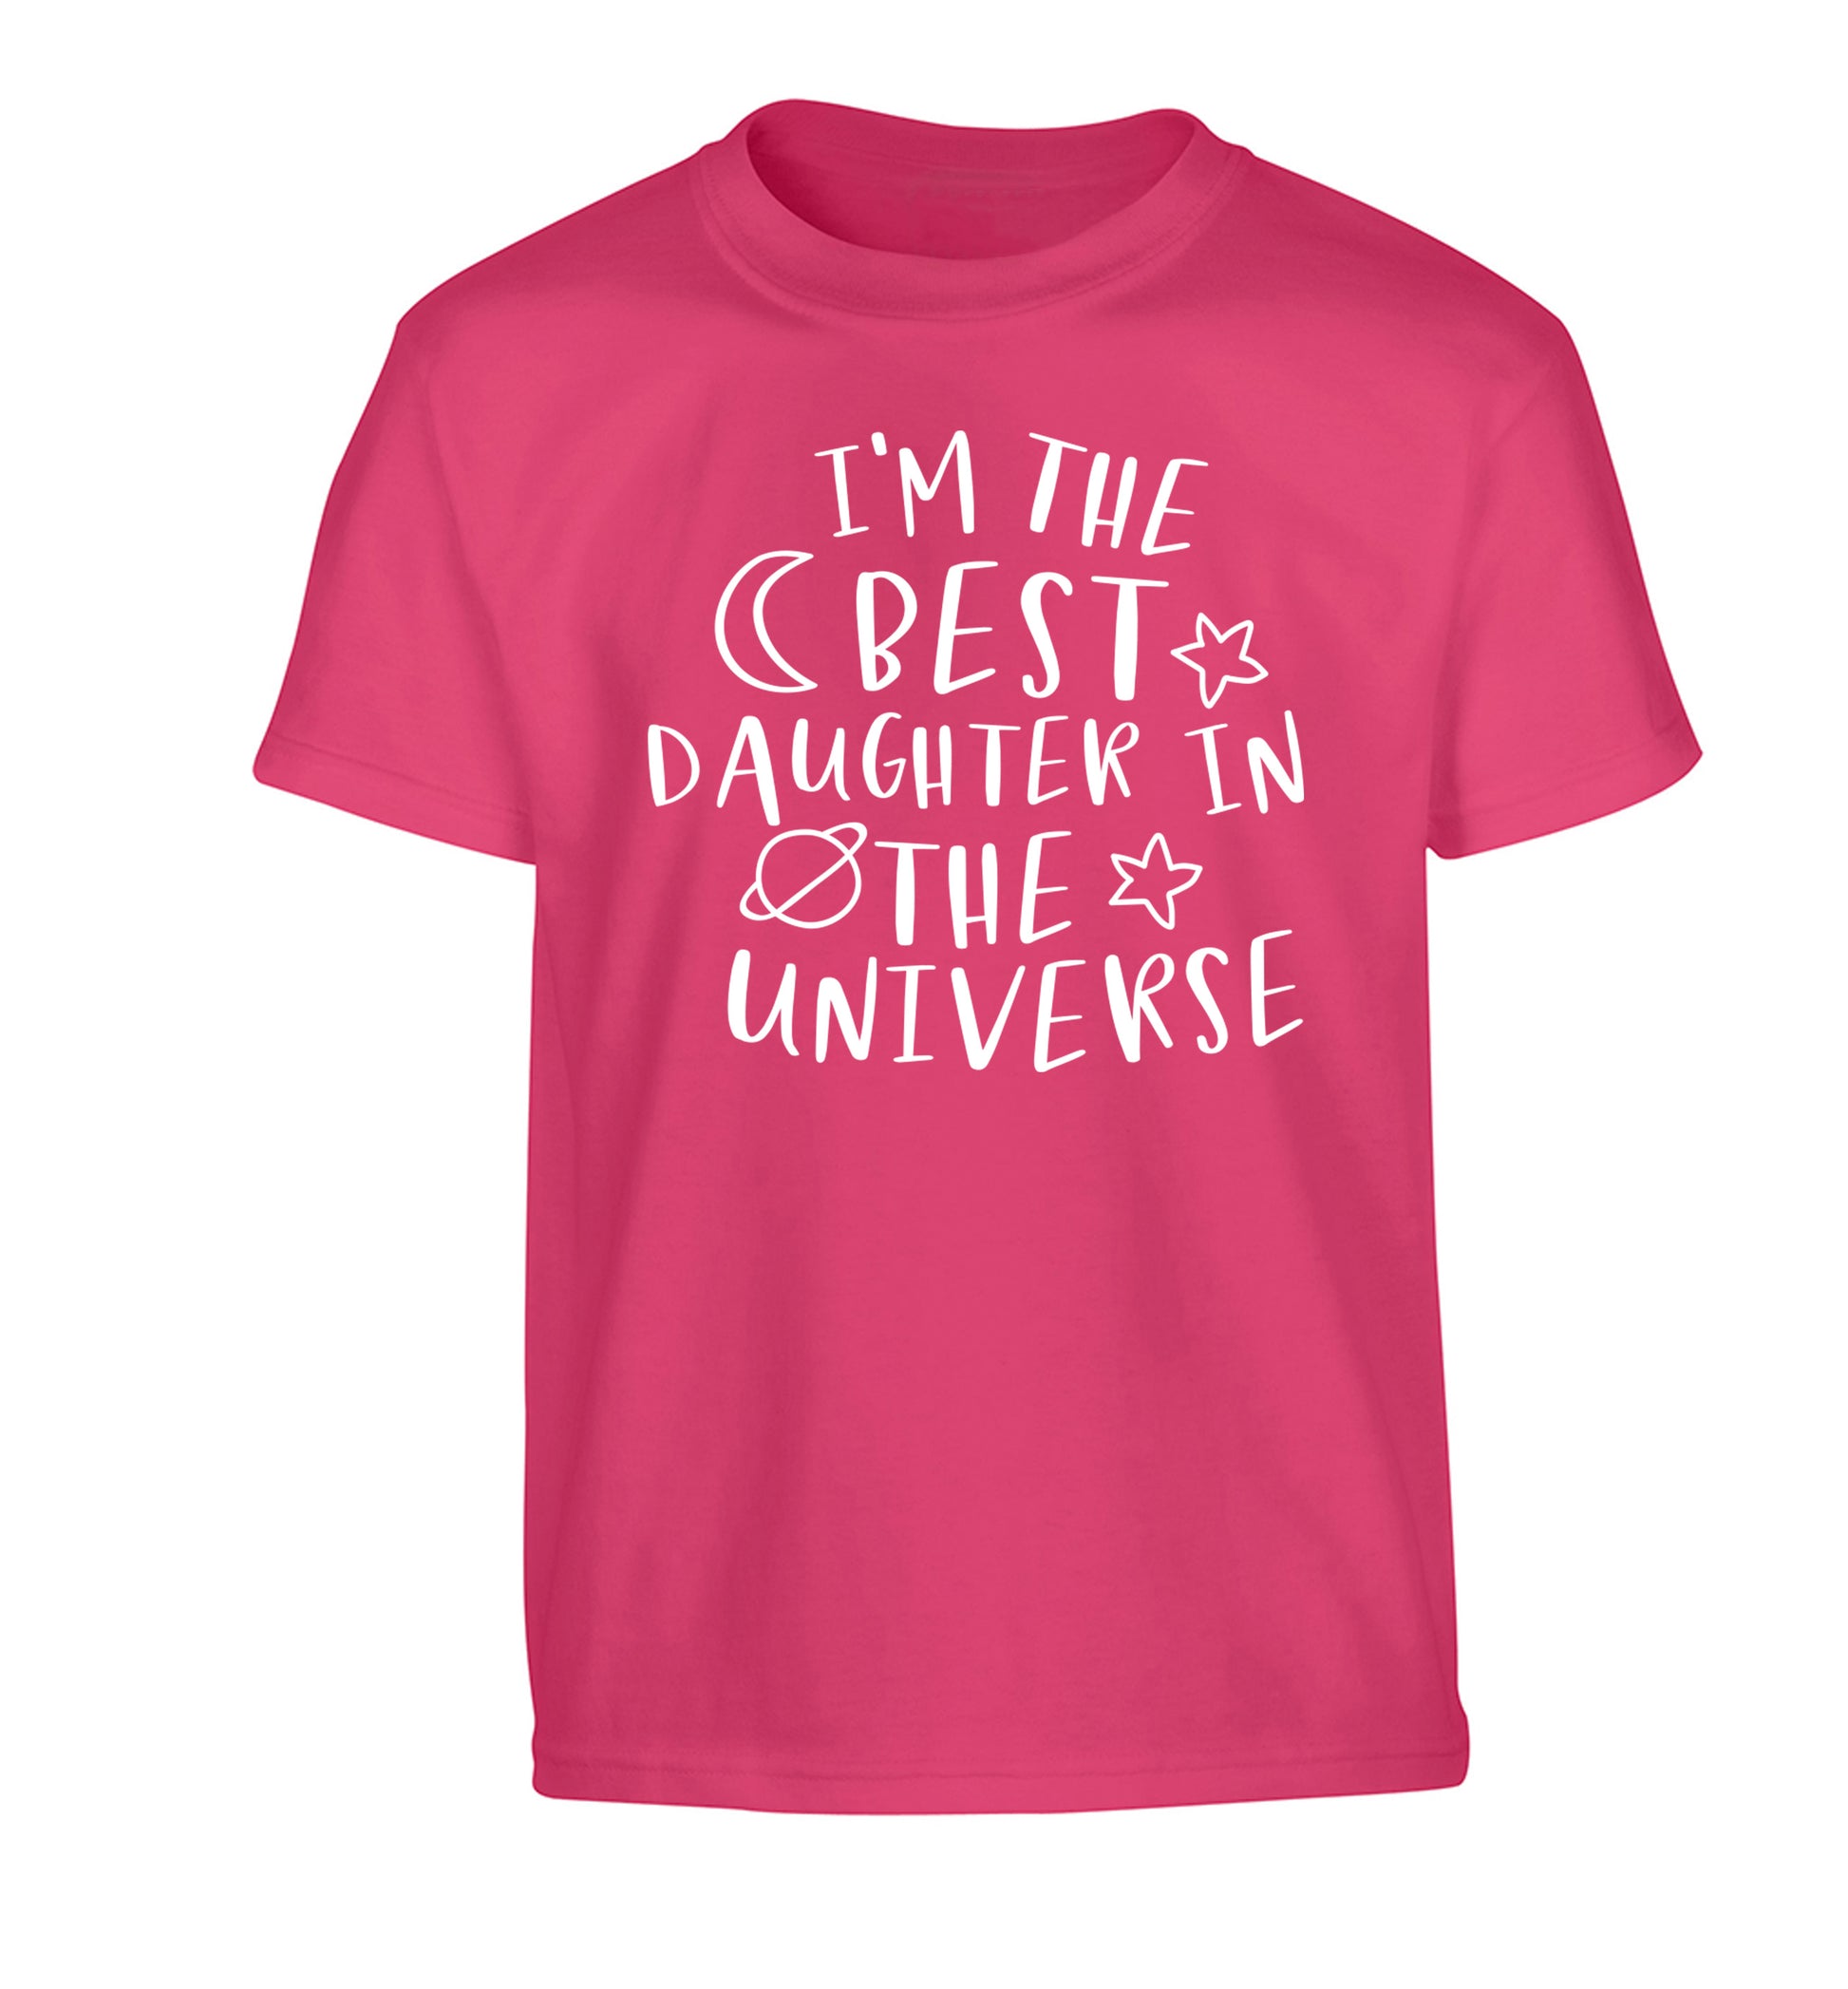 I'm the best daughter in the universe Children's pink Tshirt 12-13 Years